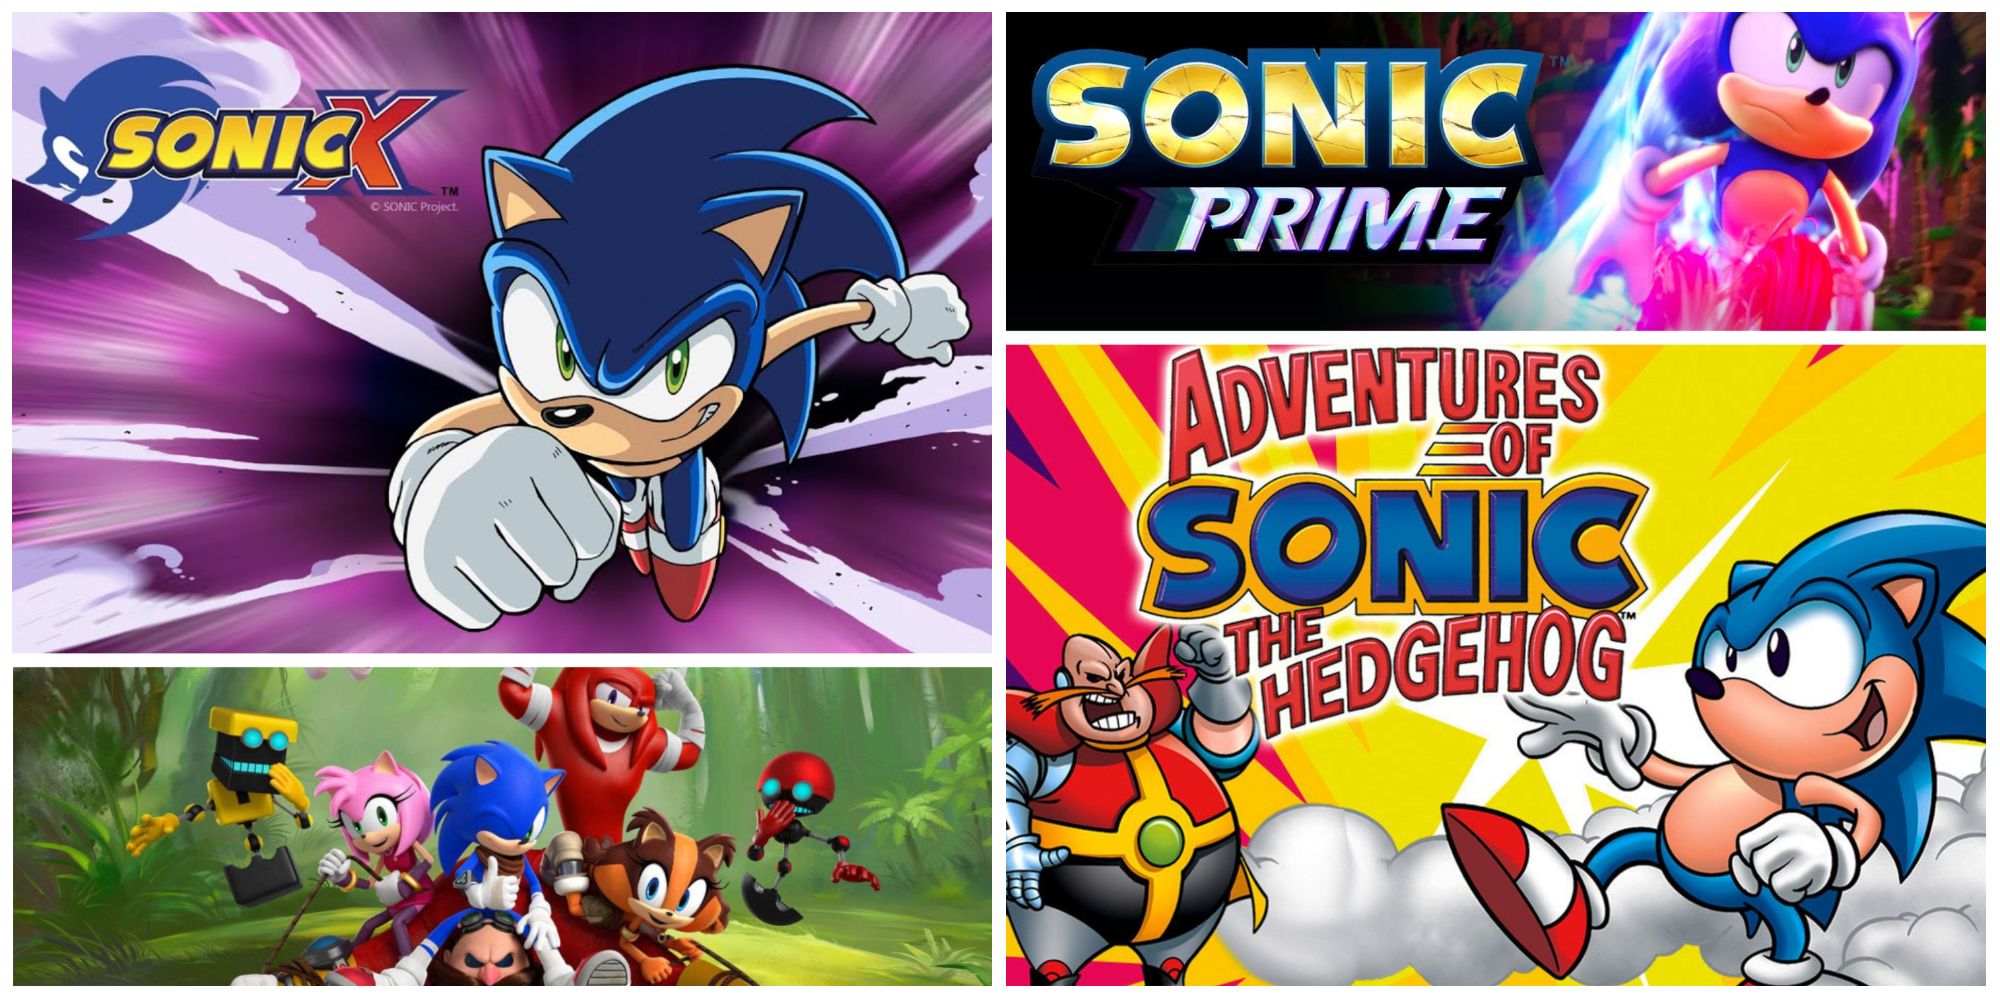 The Best Sonic The Hedgehog Cartoons, Ranked